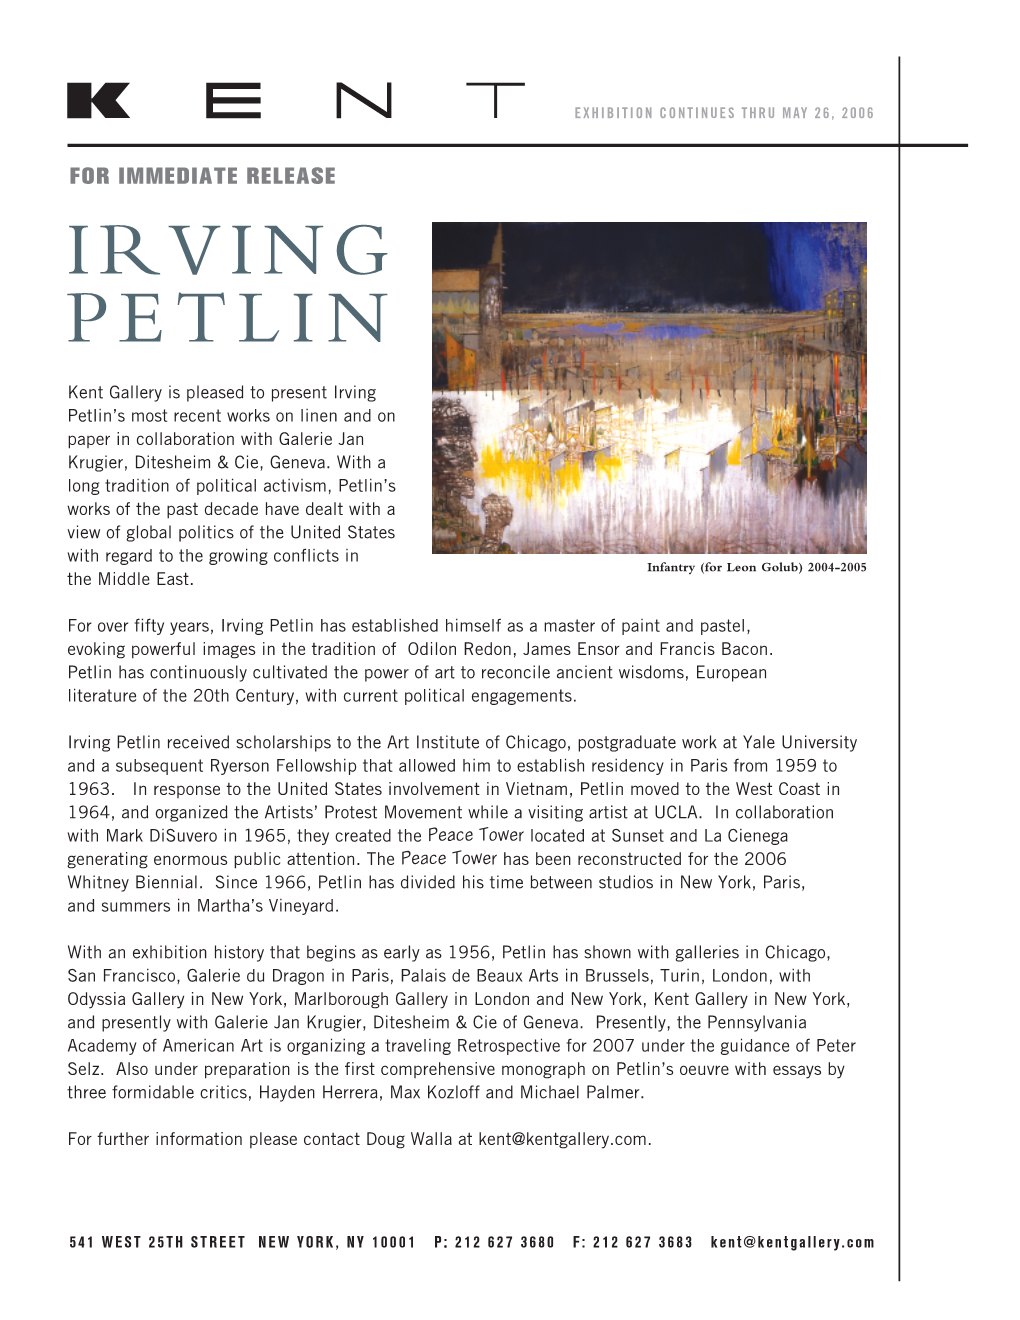 Kent Gallery Is Pleased to Present Irving Petlin's Most Recent Works On